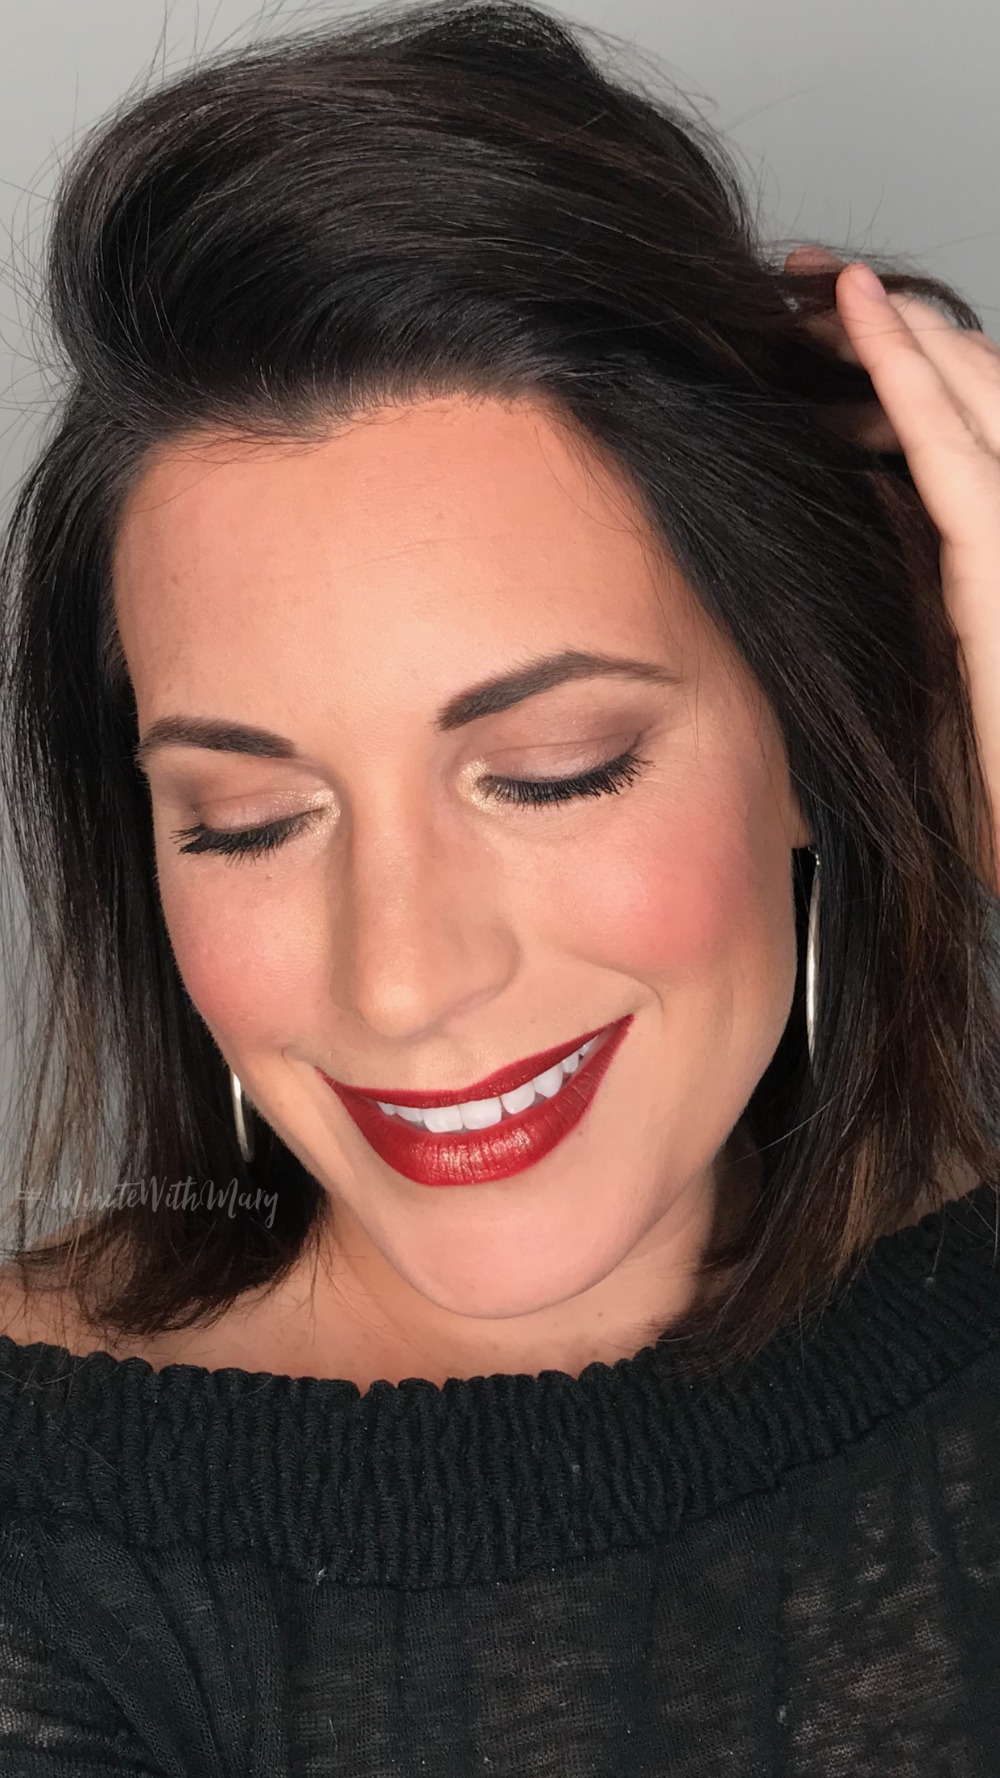 New year’s eve makeup #MinuteWithMary